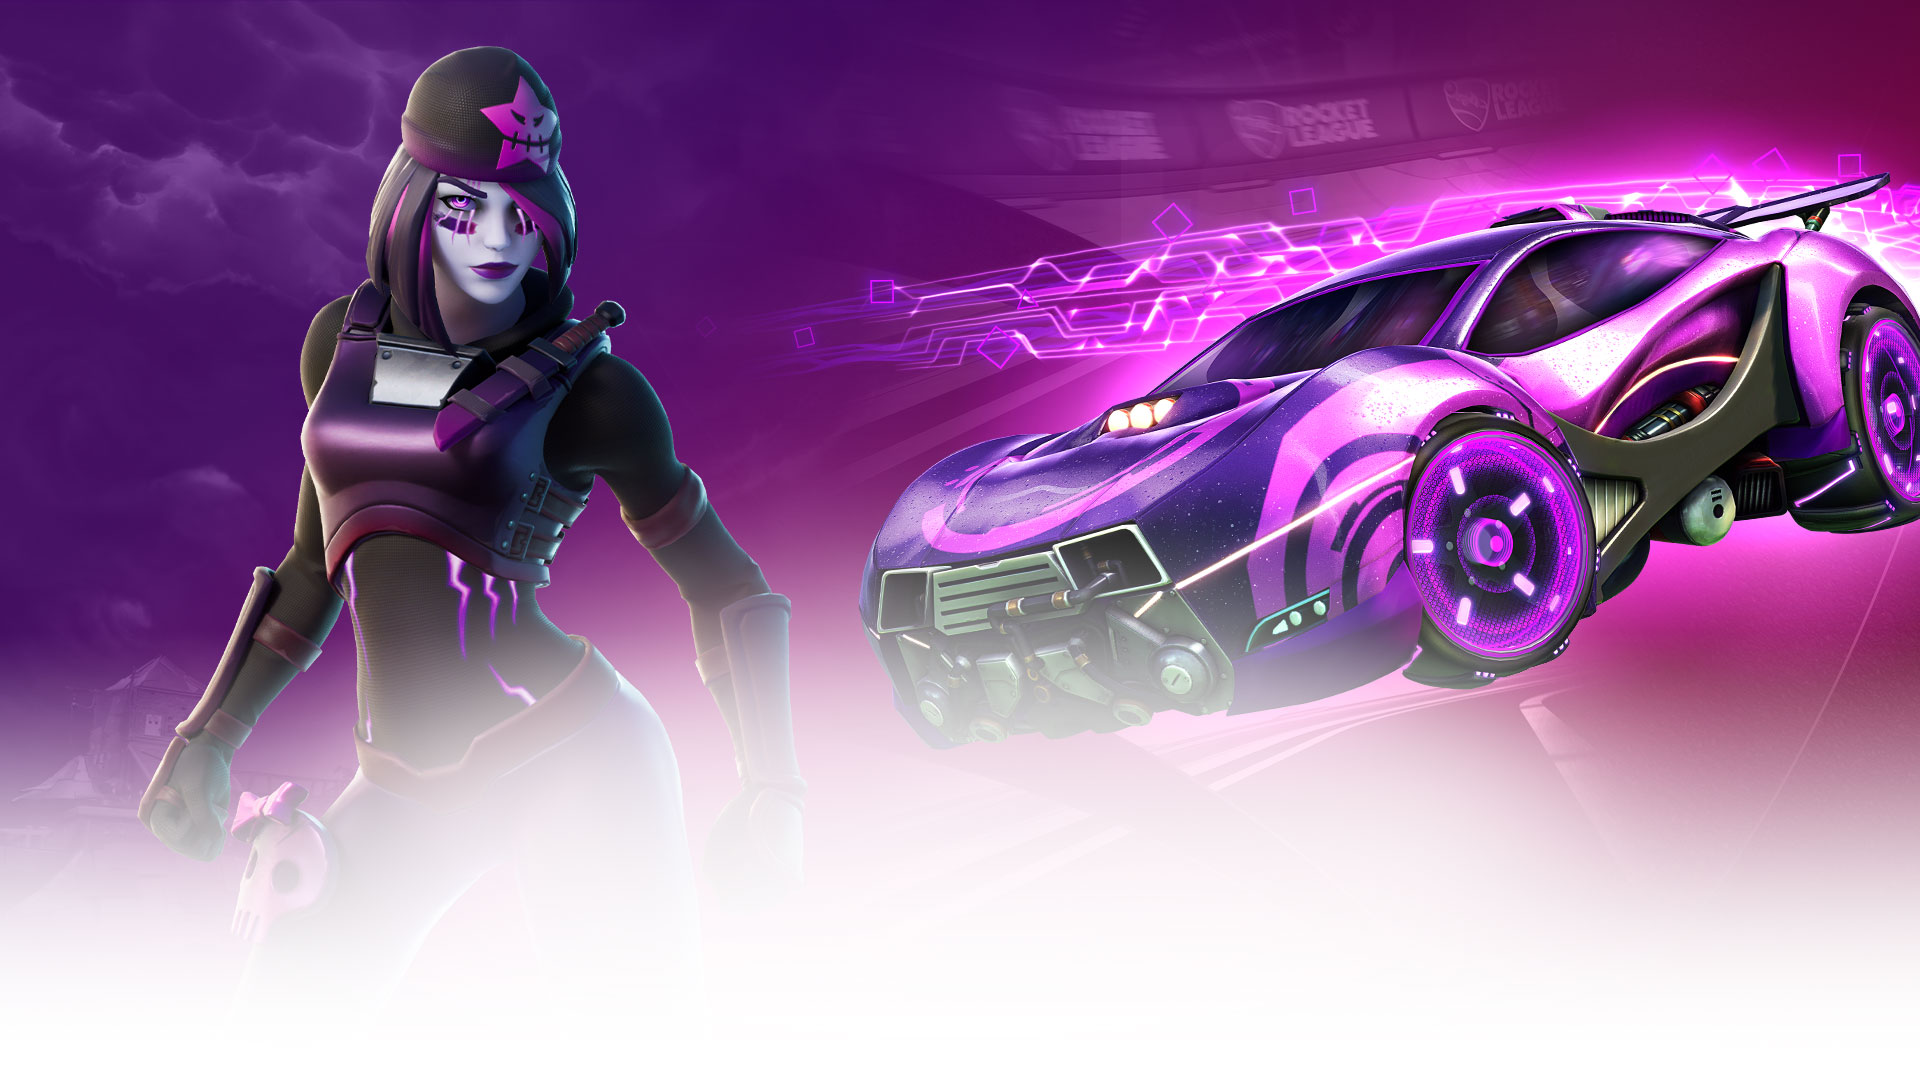 A Fortnite character poses next to a Rocket League car, both equipped with Midnight Drive Pack items.